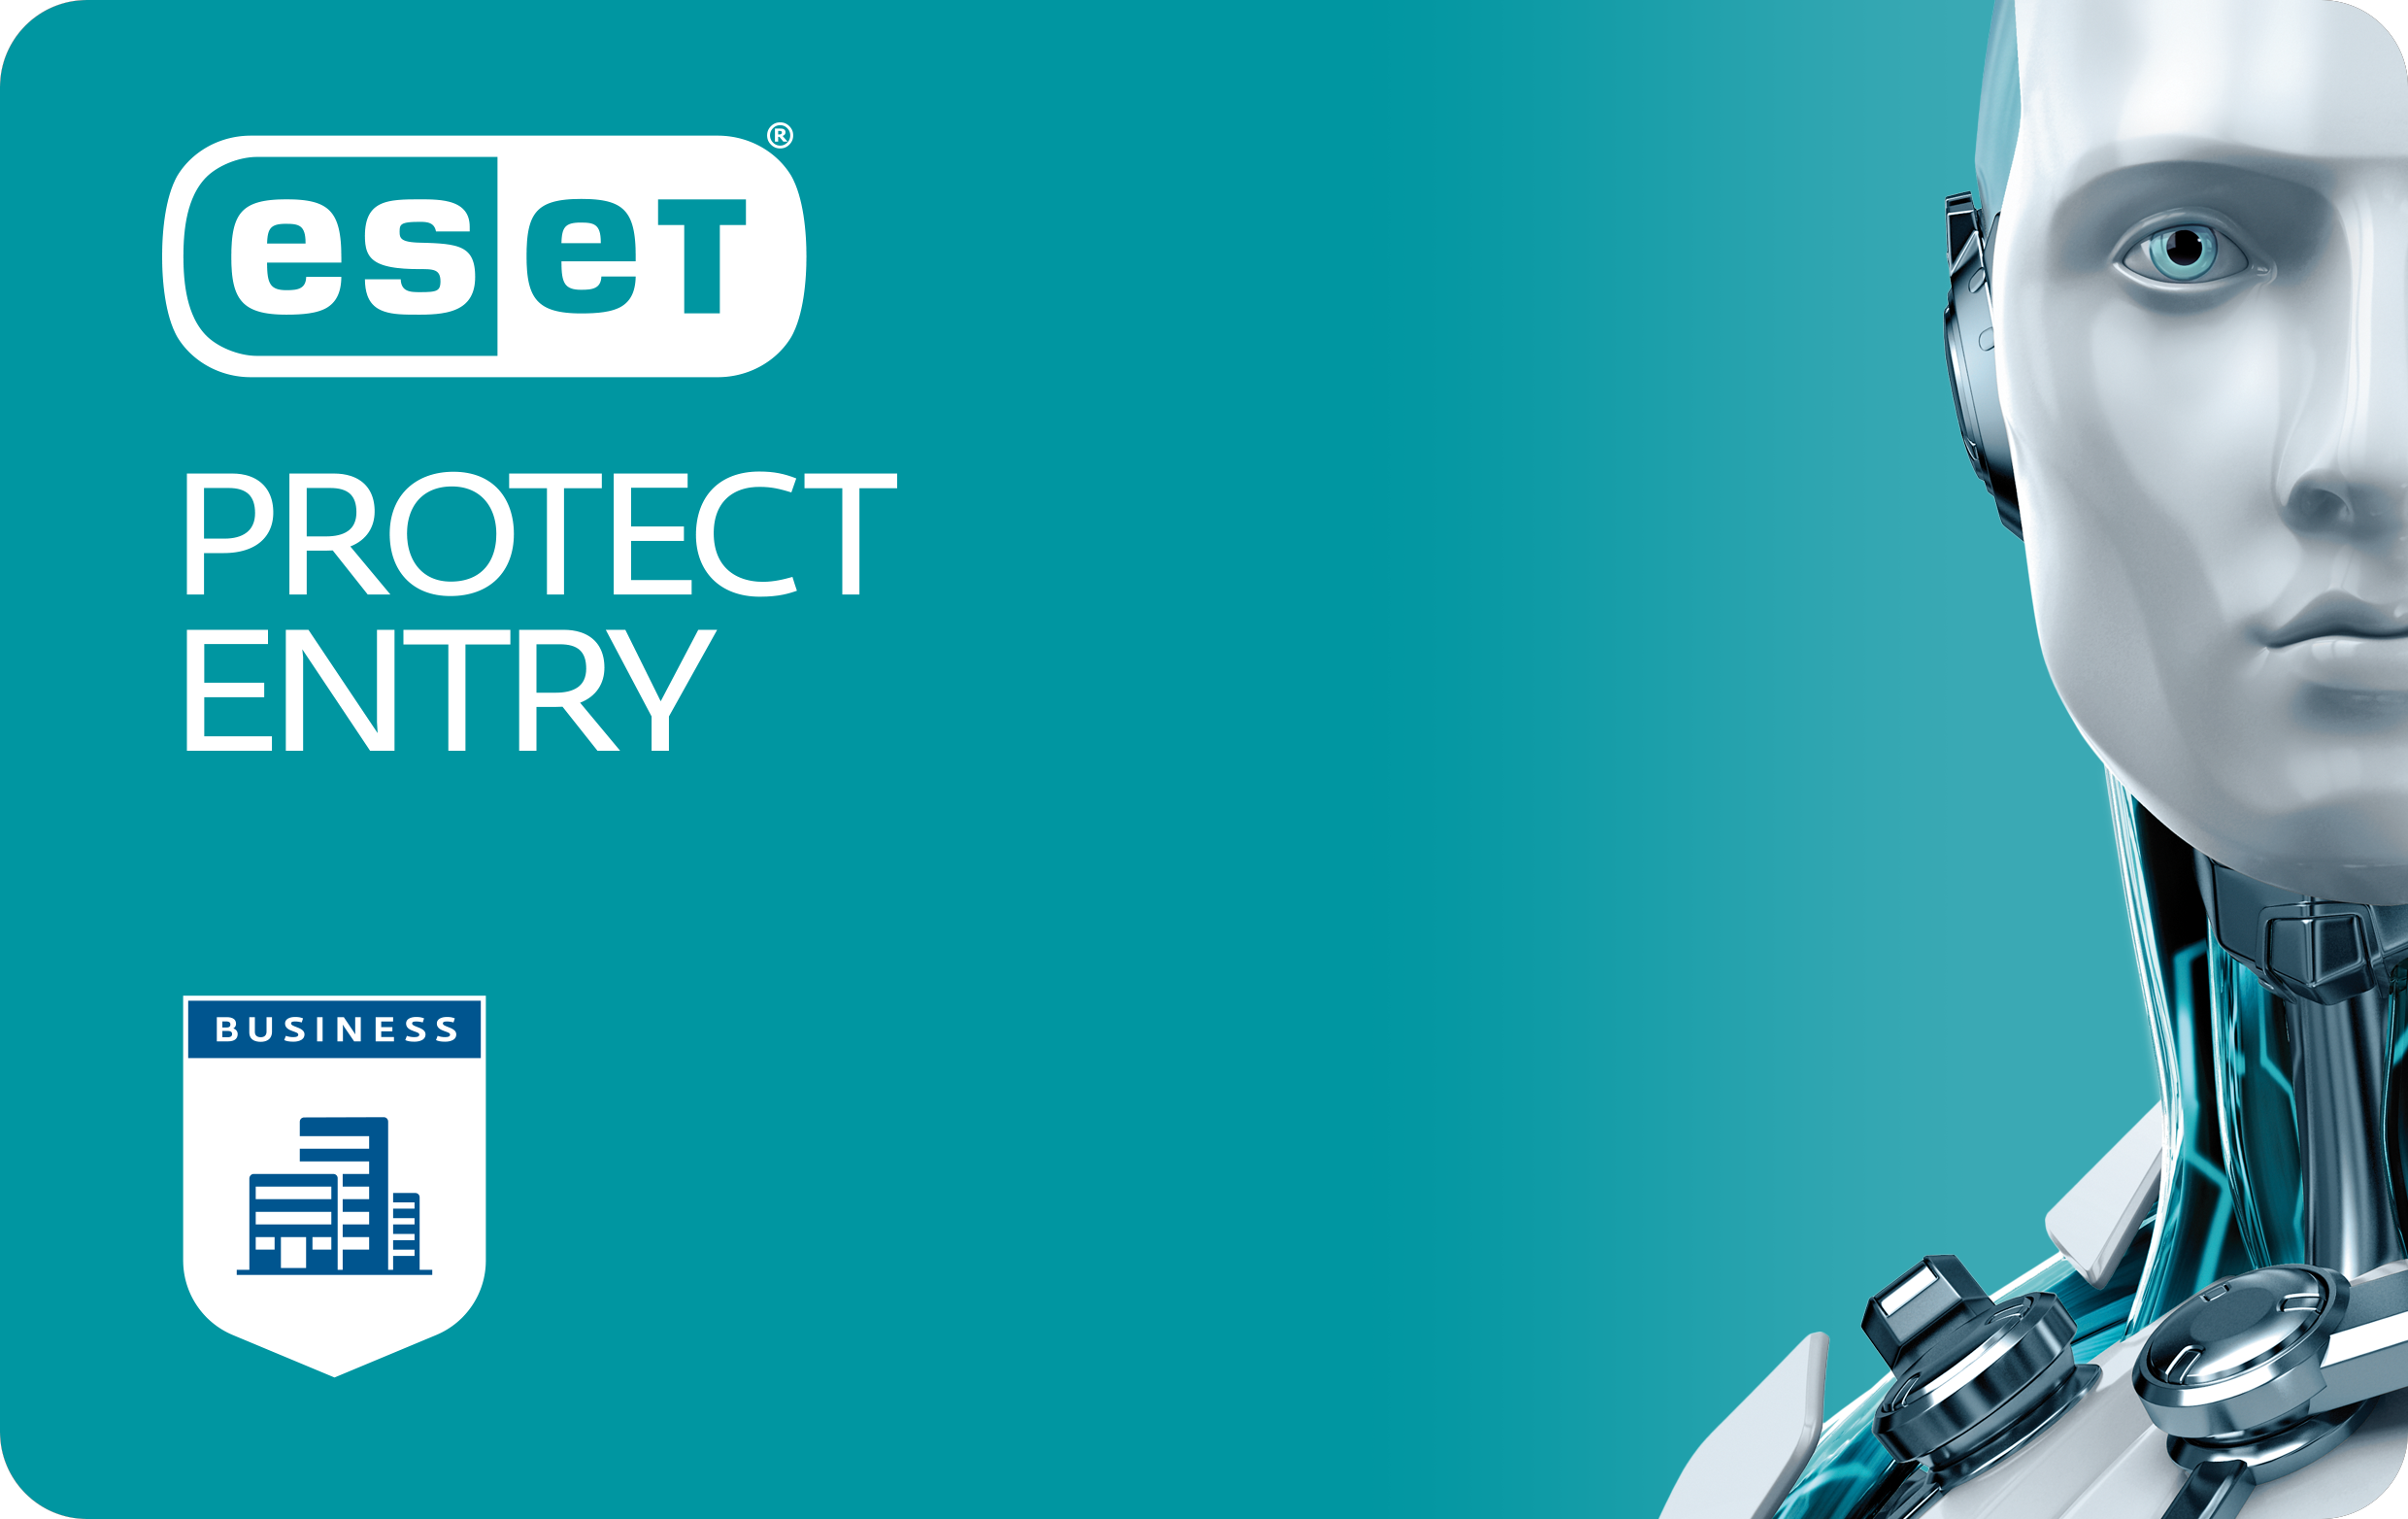 eset_protect_entry___card_card___eset_protect_entry___rgb.png